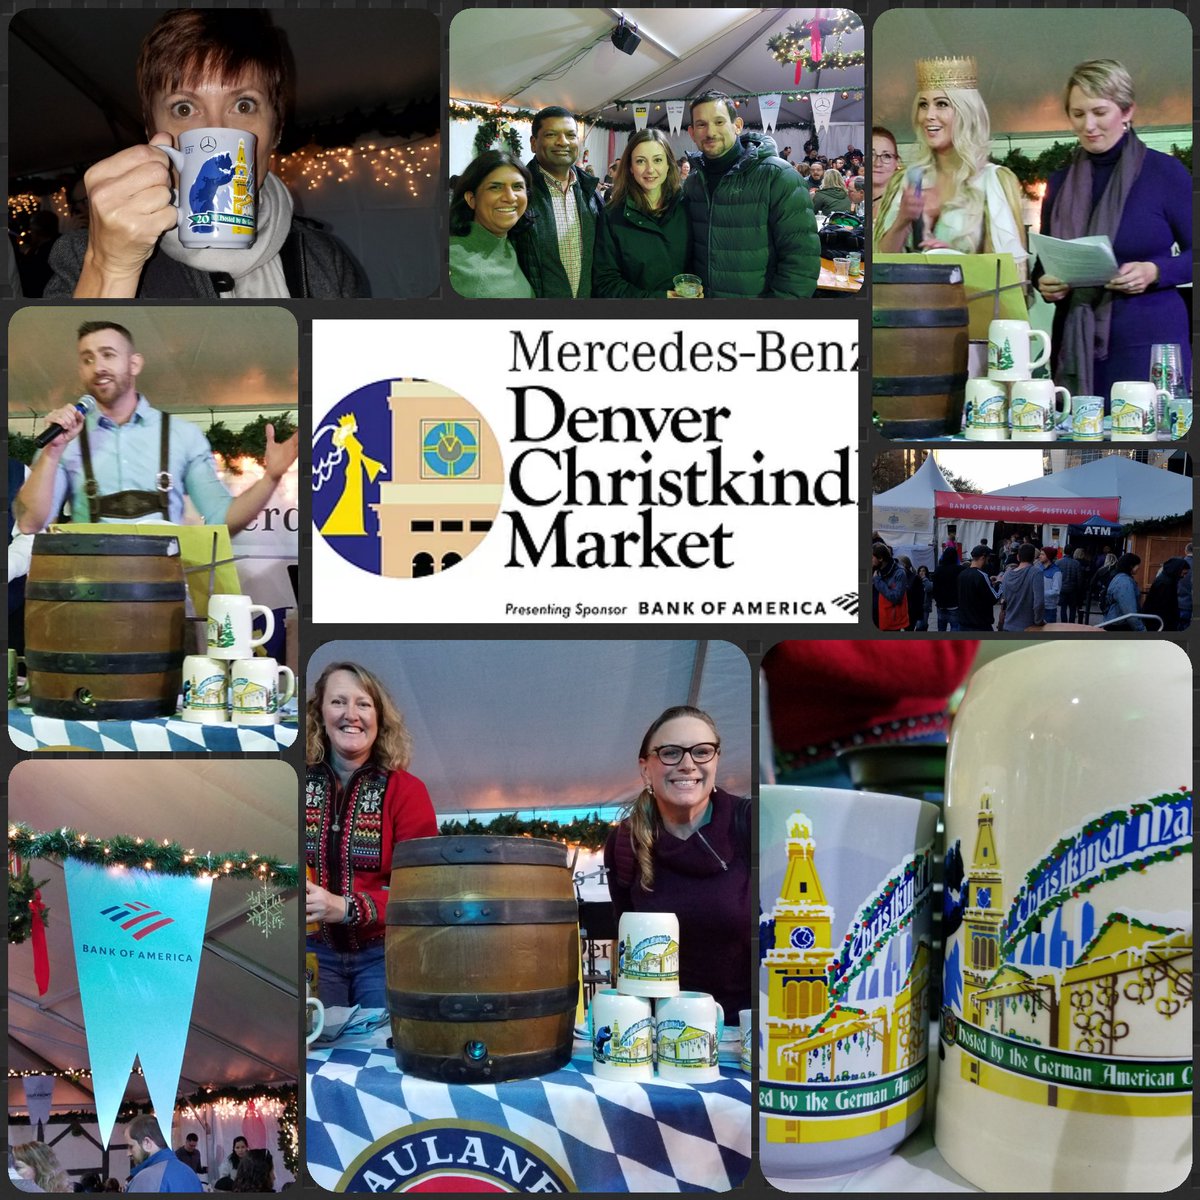 Thrilled to help officially kick-off #2019HolidaySeason at @DenverChristKindlMarket. Recover from your #BlackFriday shopping at the @BankofAmerica Festival Hall for all-day happy hour! christkindlmarketdenver.com  #Denver #DenverChristkindlMarket